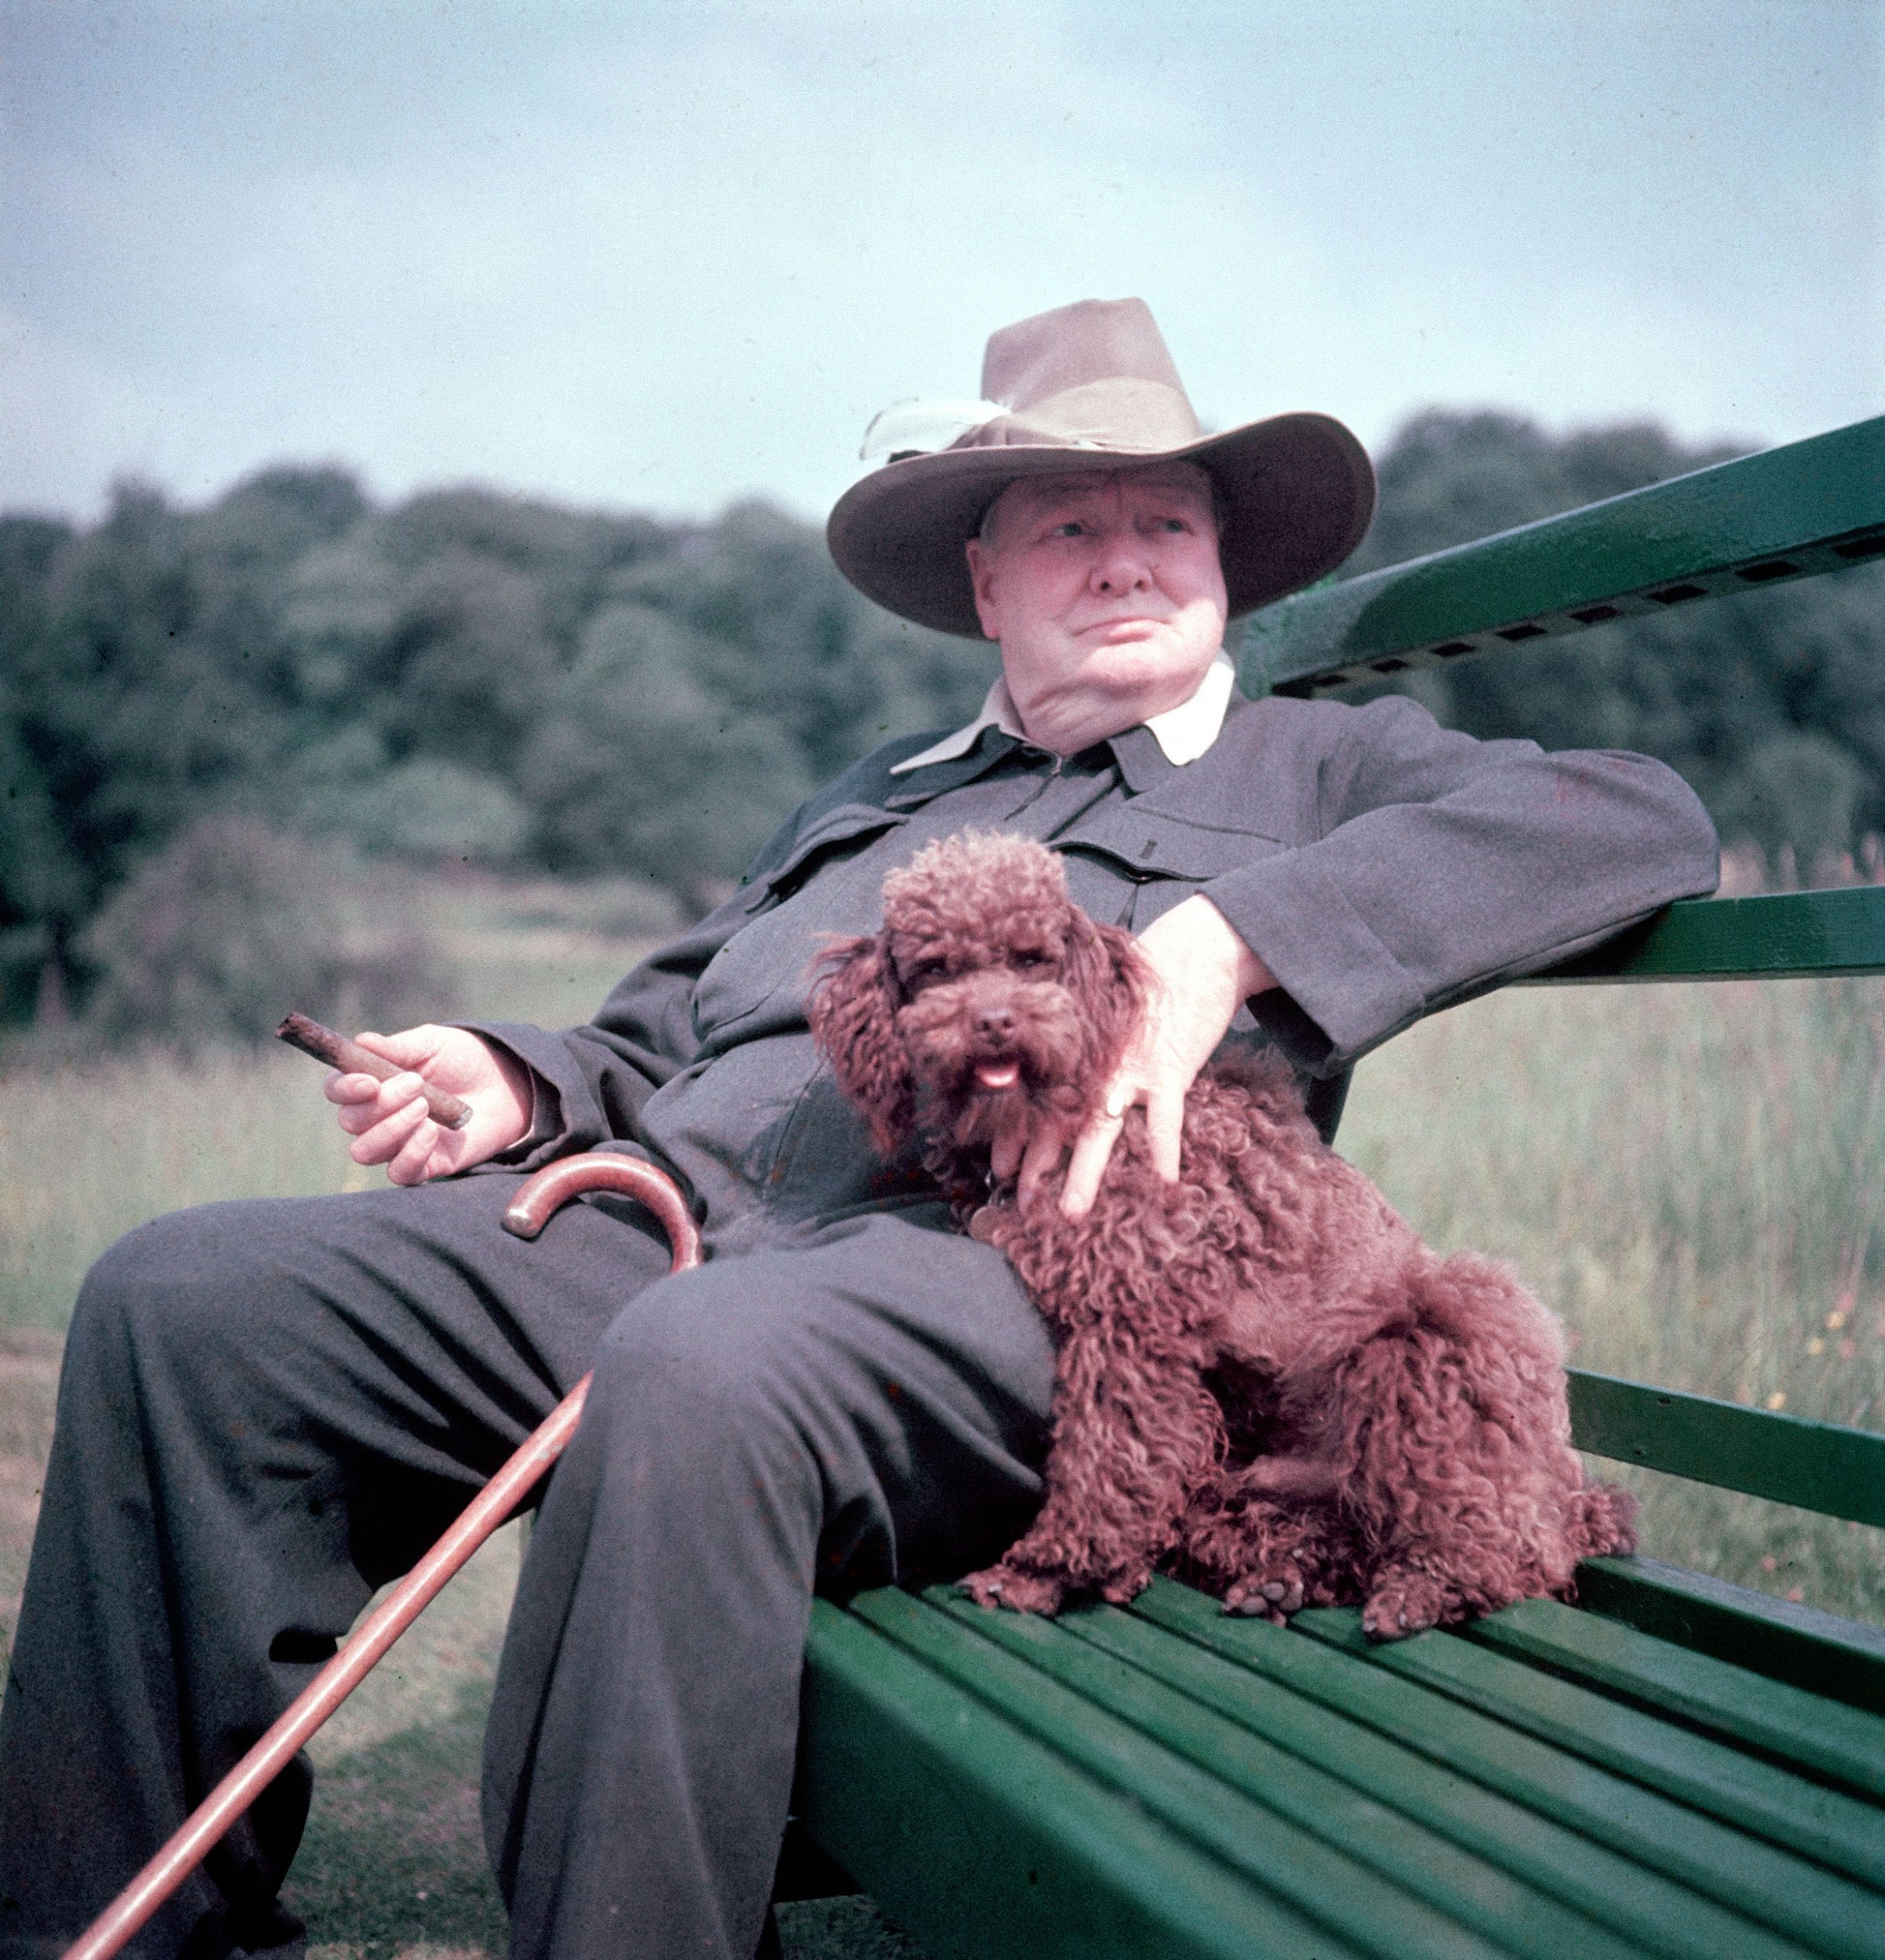 Winston Churchill and his dog, Rufus, at Chartwell in 1950.